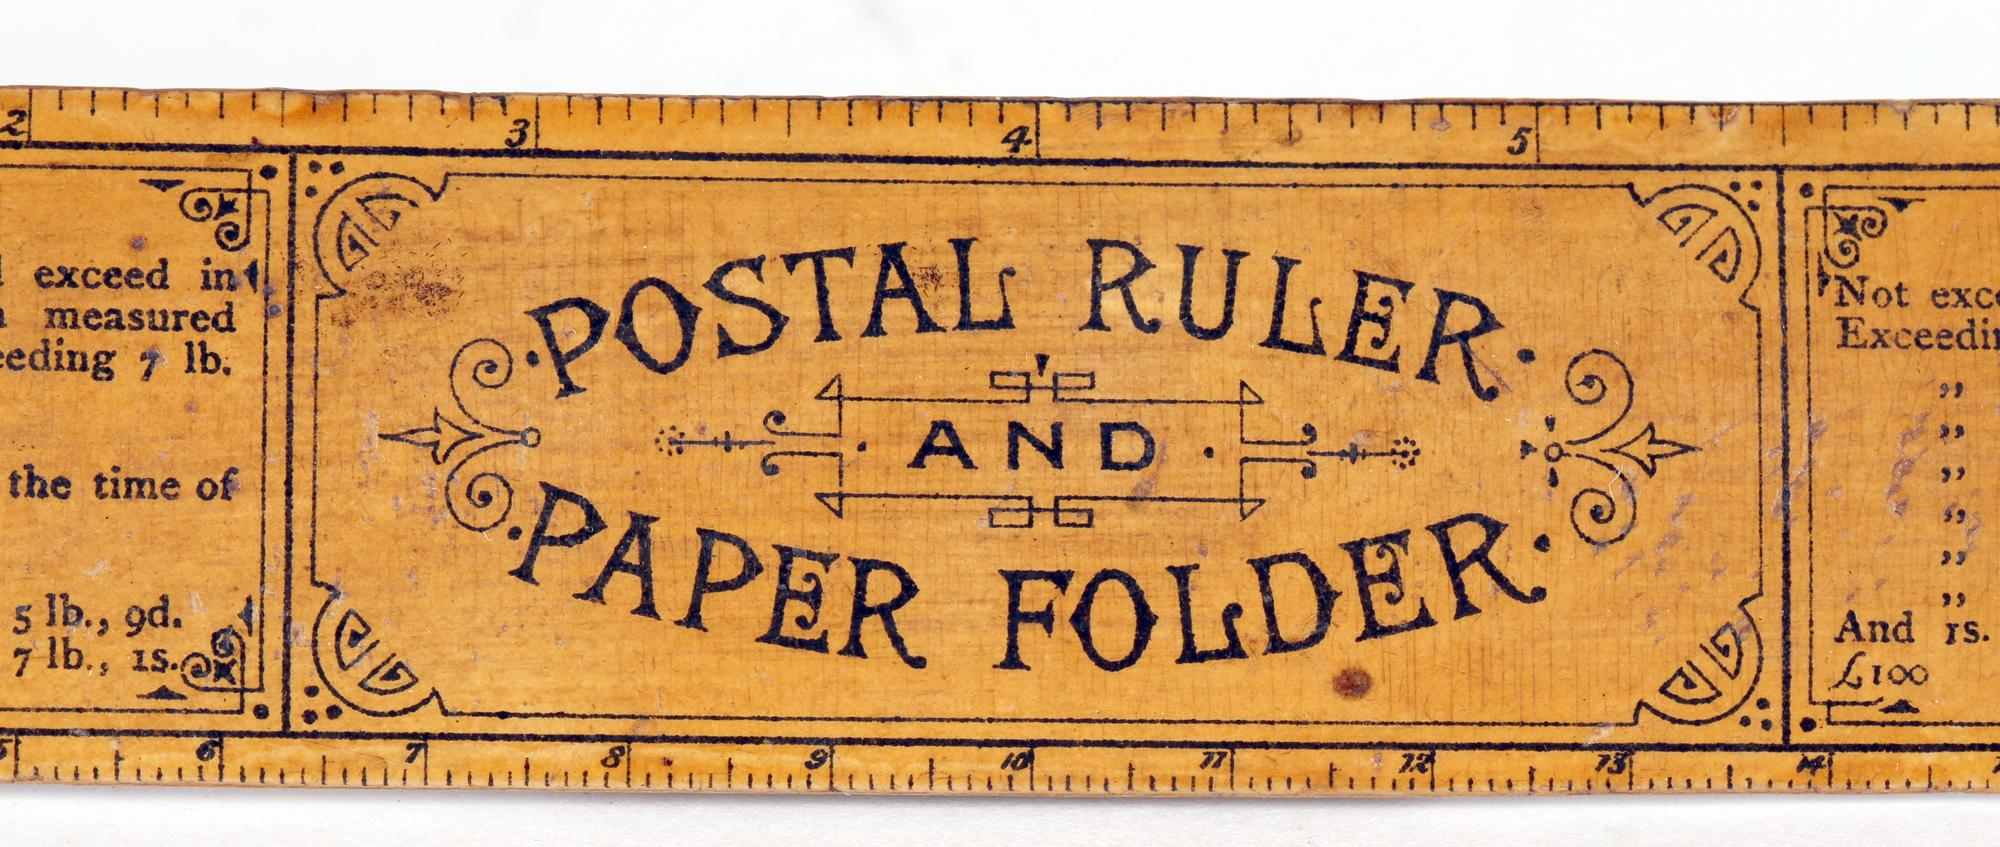 A very rare Scottish Mauchline wooden postal ruler and paper folder decorated with a scene of the beach & cliffs in cromer, norfolk and probably dating from the mid 19th century. While originally made as souvenir items this ruler also provides a